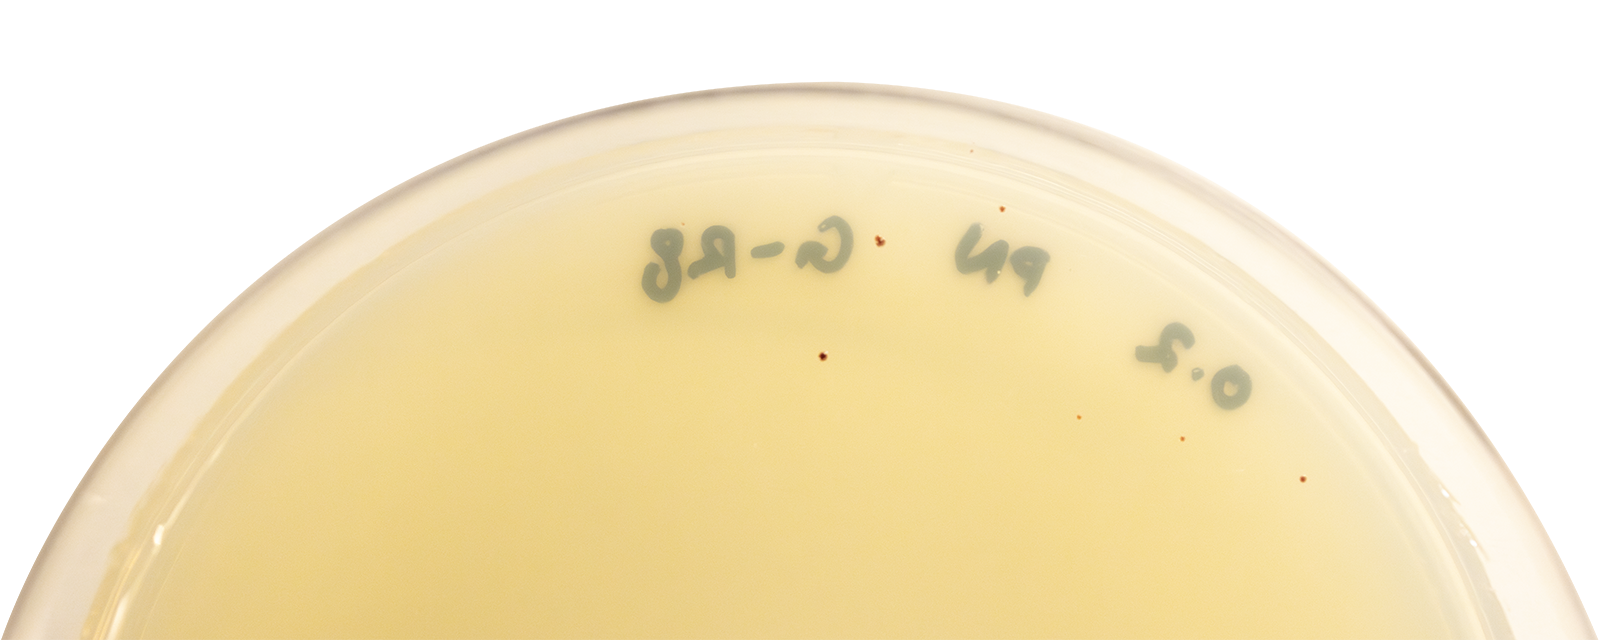 A petri dish with writing and a few really small red dots on it